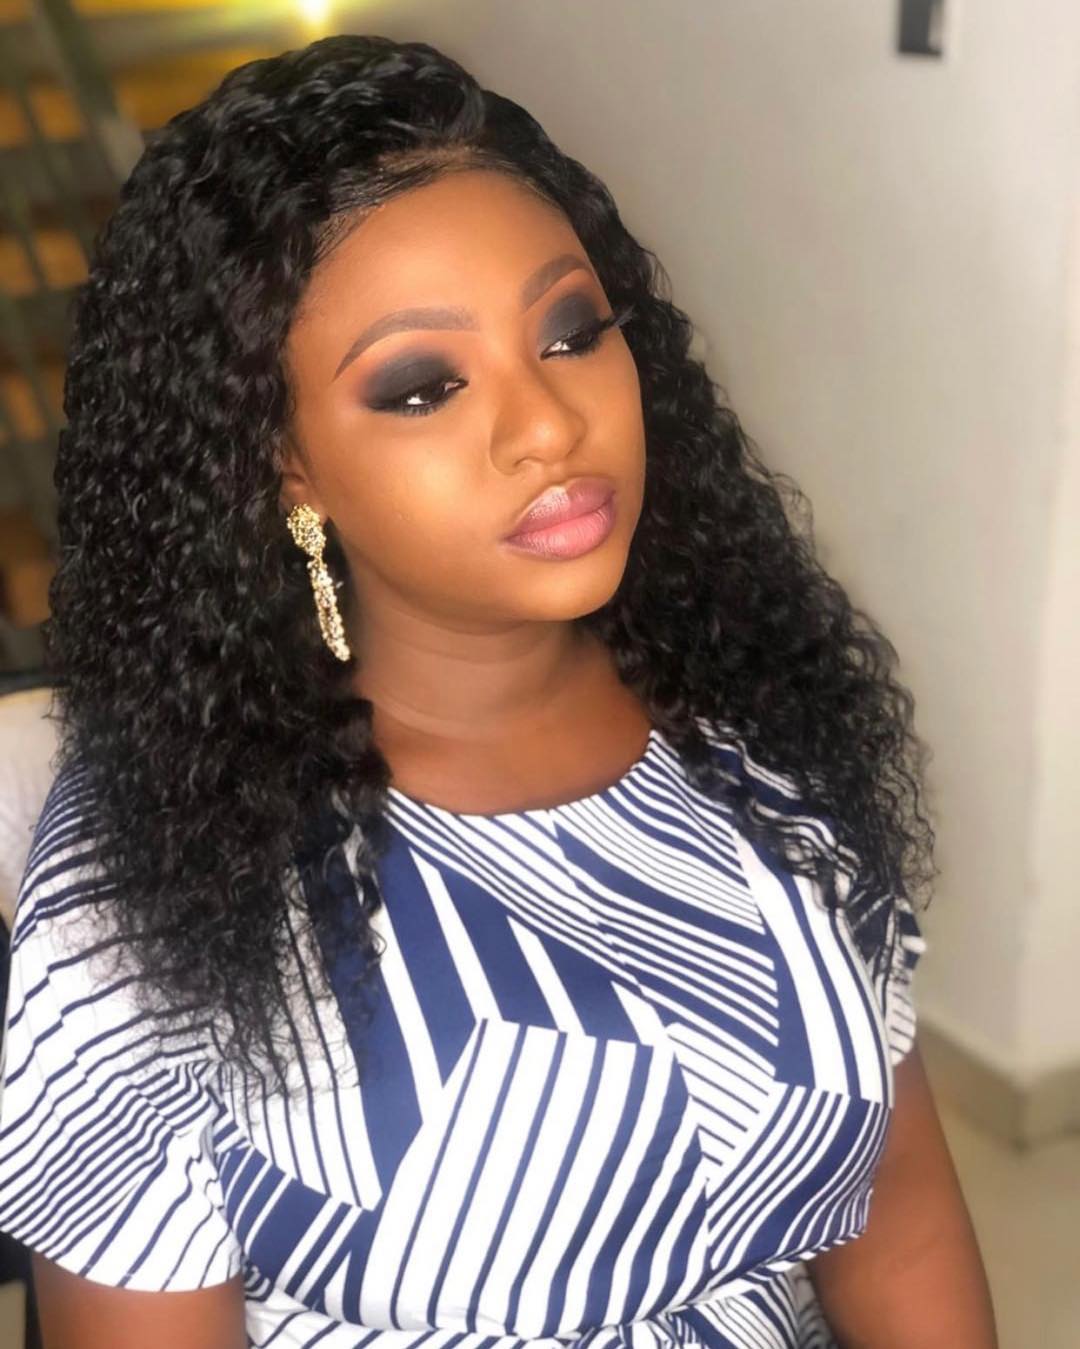 Yvonne Jegede reveals she now takes permission from her parents to go out